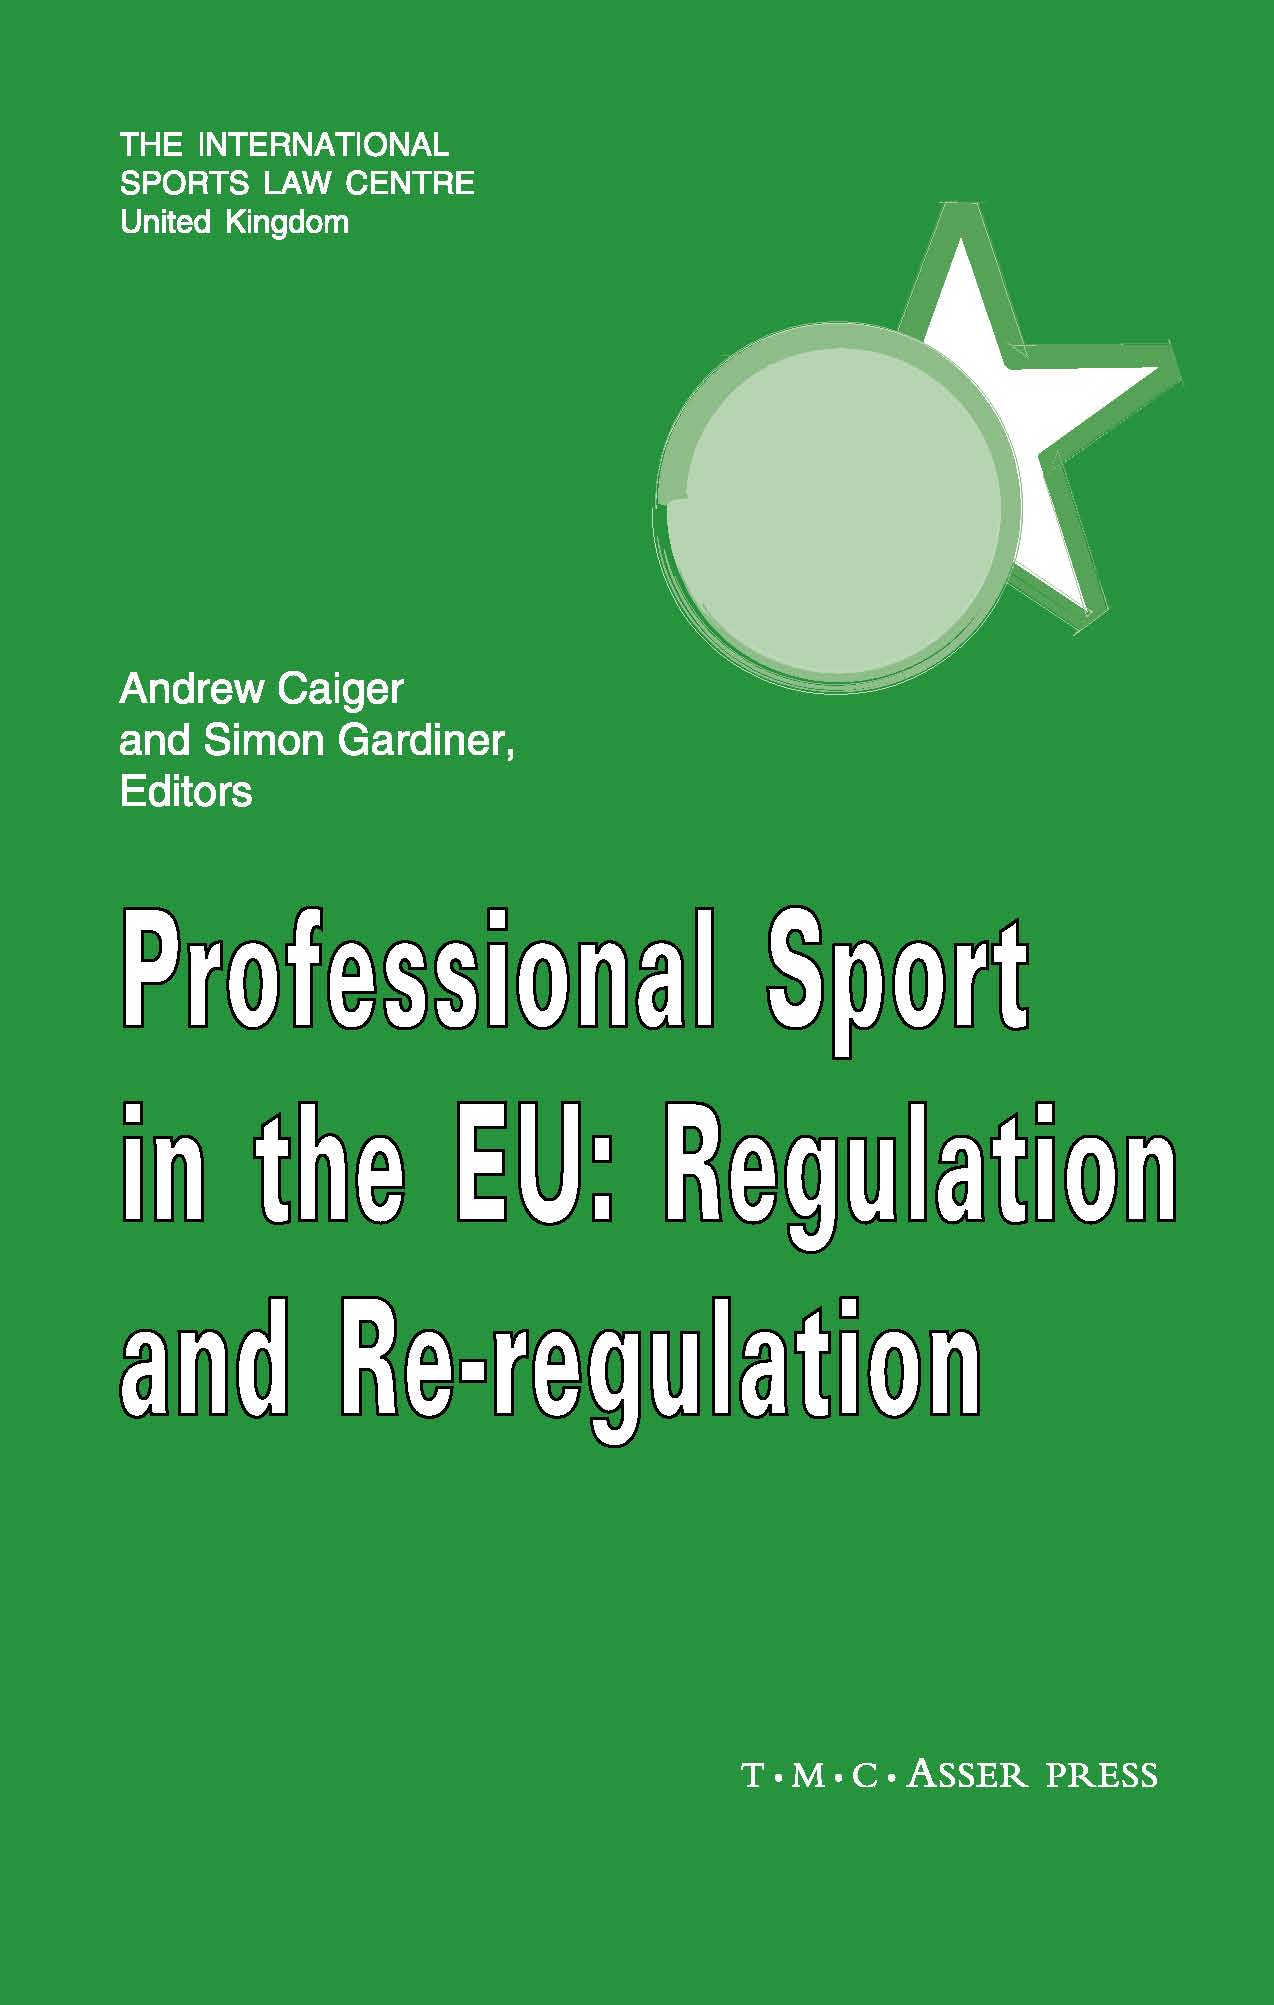 Professional Sport in the European Union - Regulation and Re-Regulation